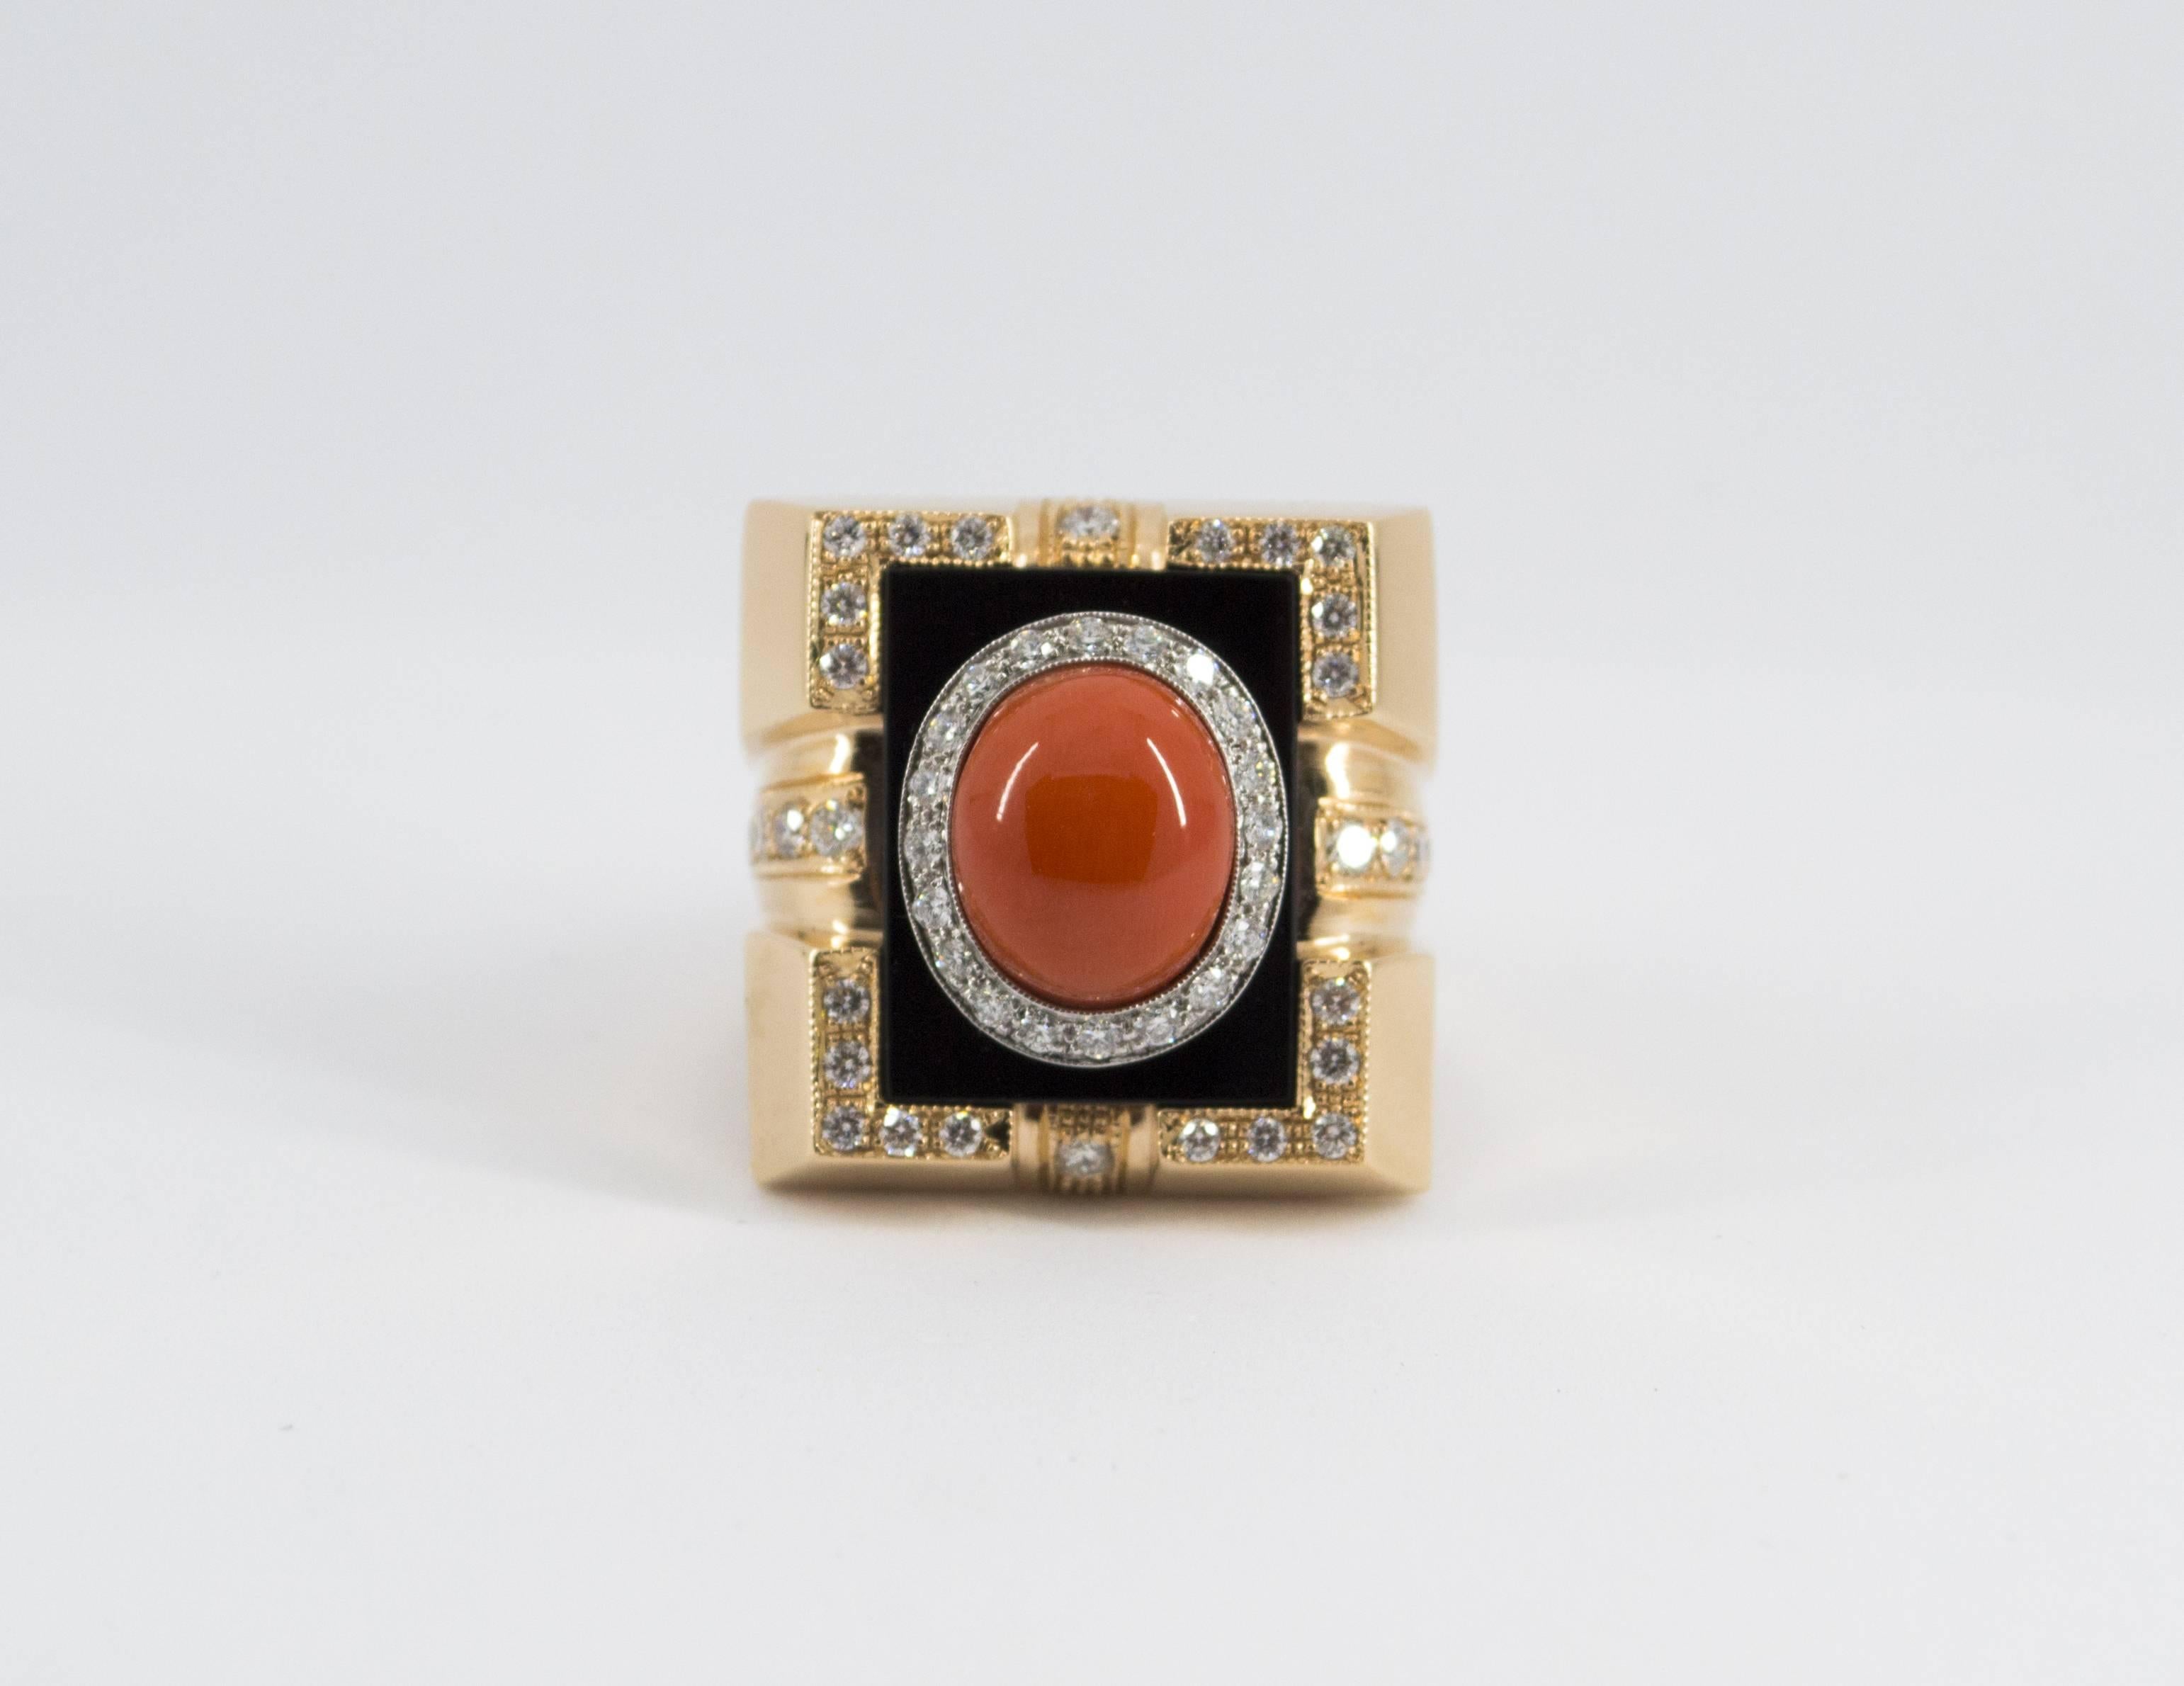 This Ring is made of 14K Yellow Gold.
This Ring has 0.90 Carats of Diamonds.
This Ring has also a Red Mediterranean (Sardinia, Italy) Coral and Onyx.
This Ring is inspired by Renaissance Style.
Size ITA: 14.5 USA: 7
We're a workshop so every piece